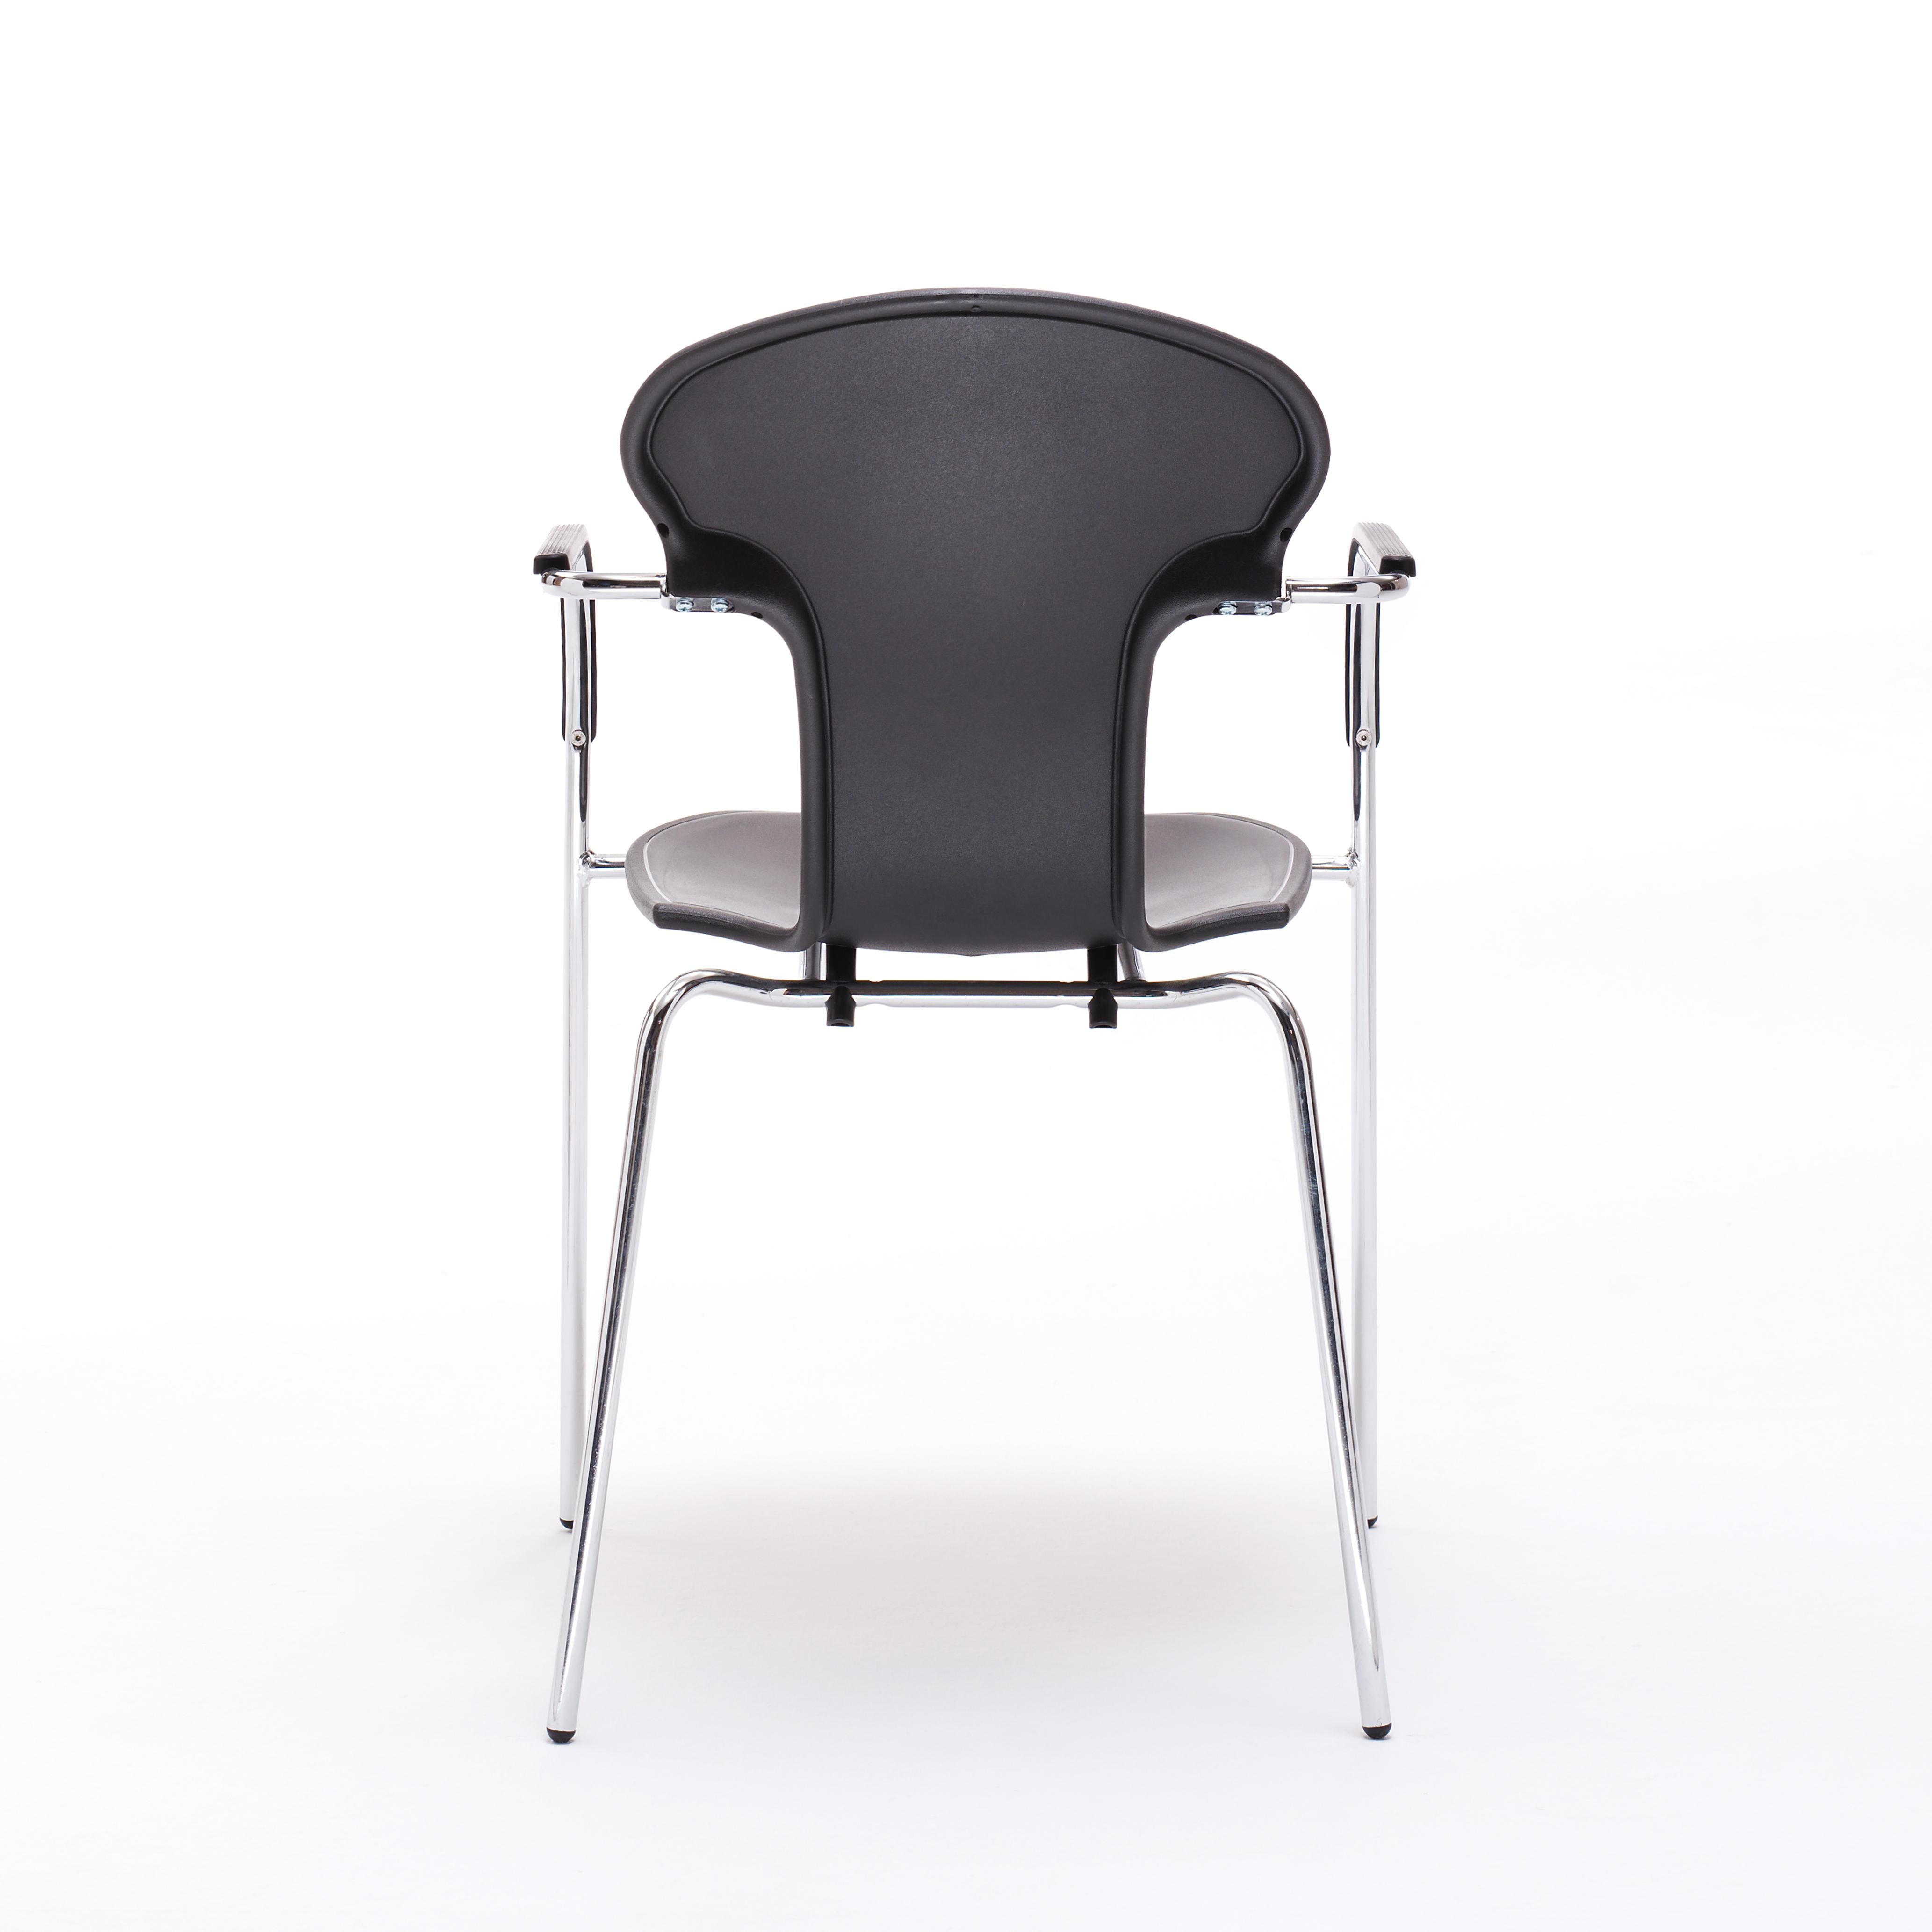 Design by Oscar Tusquets Blanca
Manufactured by BD Barcelona.

Structure in chromed steel tube. Seat and back shell in white or black gas injected polypropylene or upholstered. Optional: Grey or black integral armrests.


Year: 2008.
  